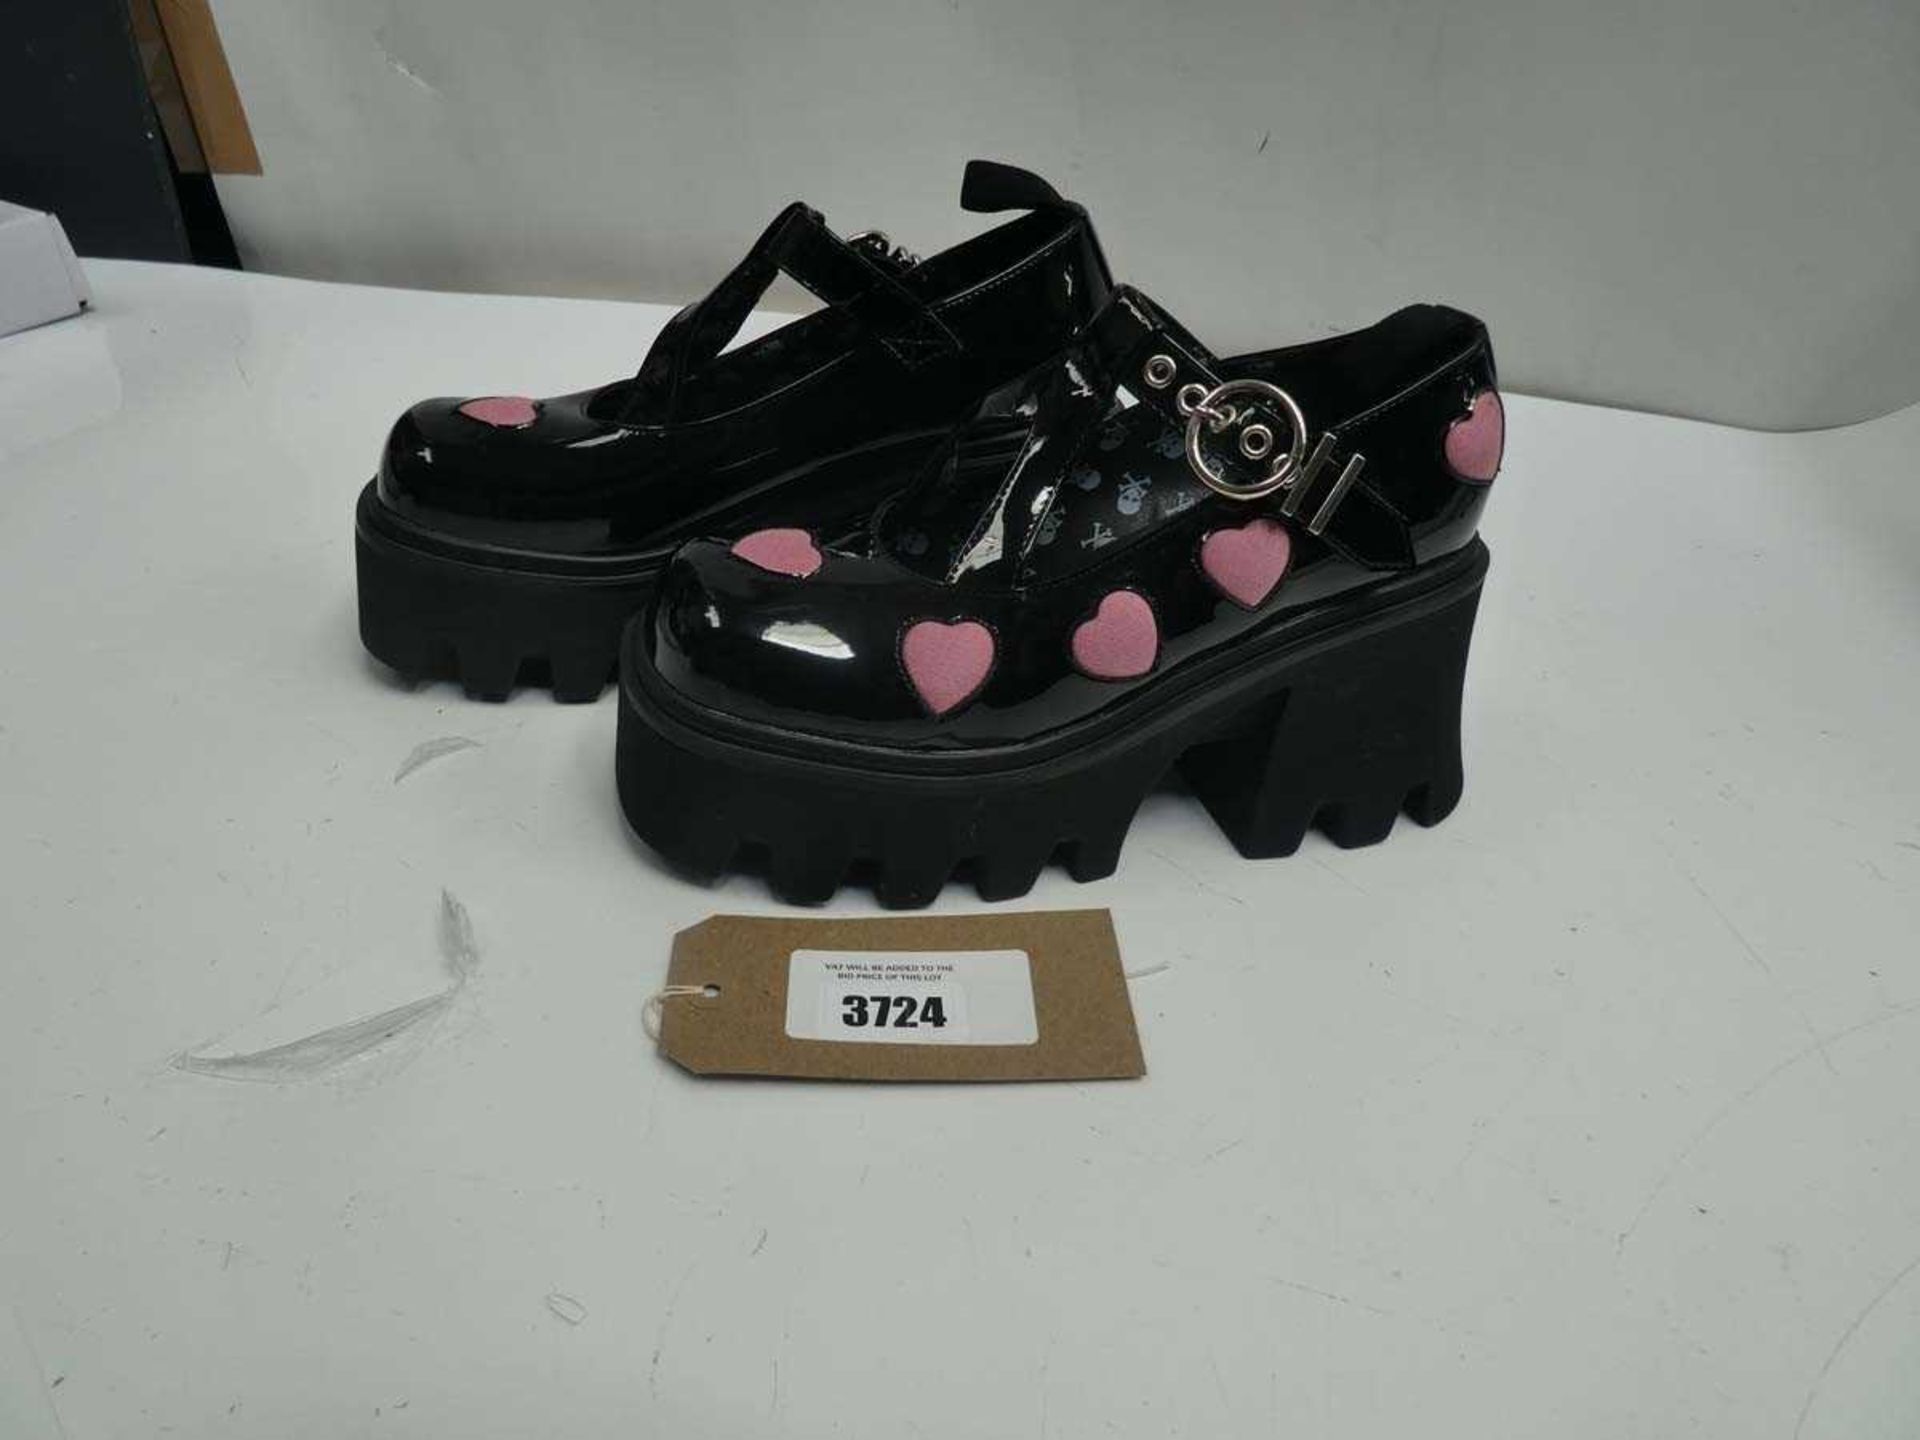 +VAT Pair of Lamoda platform shoes in black with pink hearts, size 6